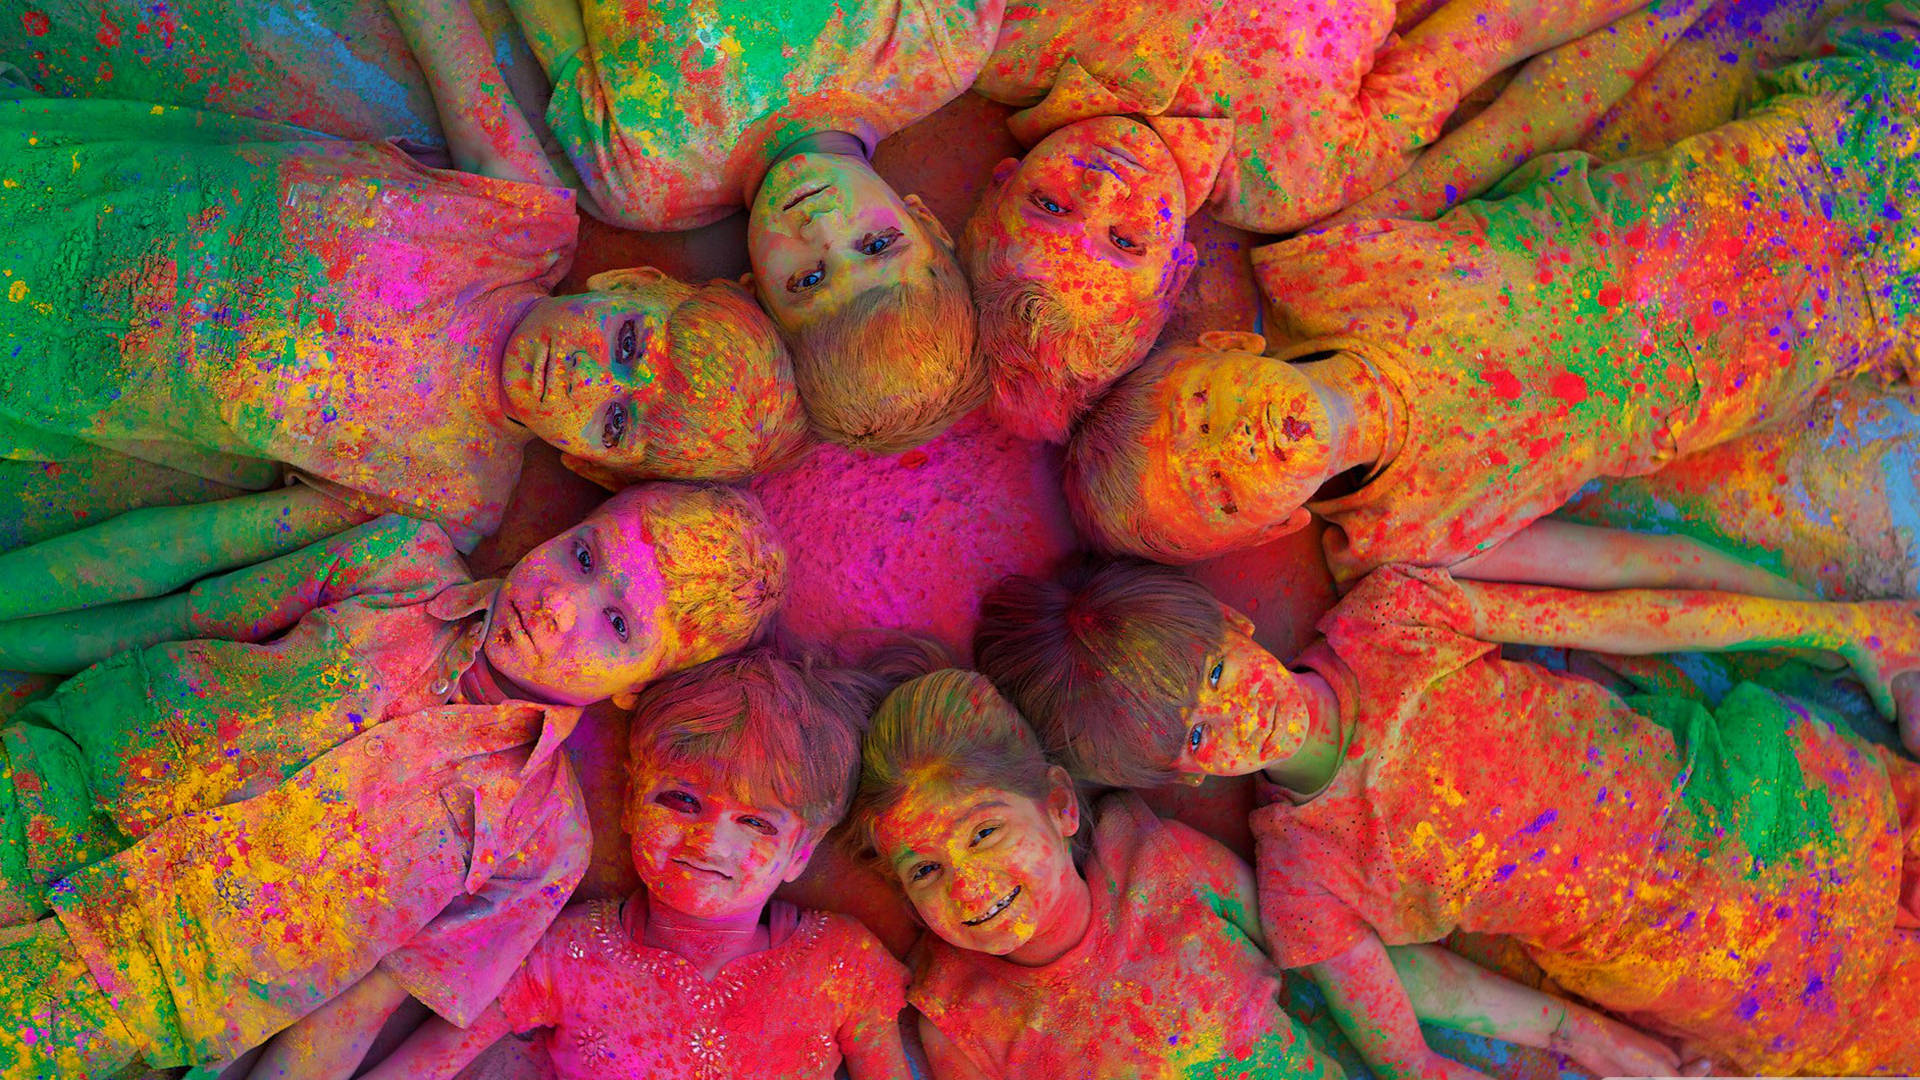 790 Holi Wallpaper Stock Video Footage - 4K and HD Video Clips |  Shutterstock